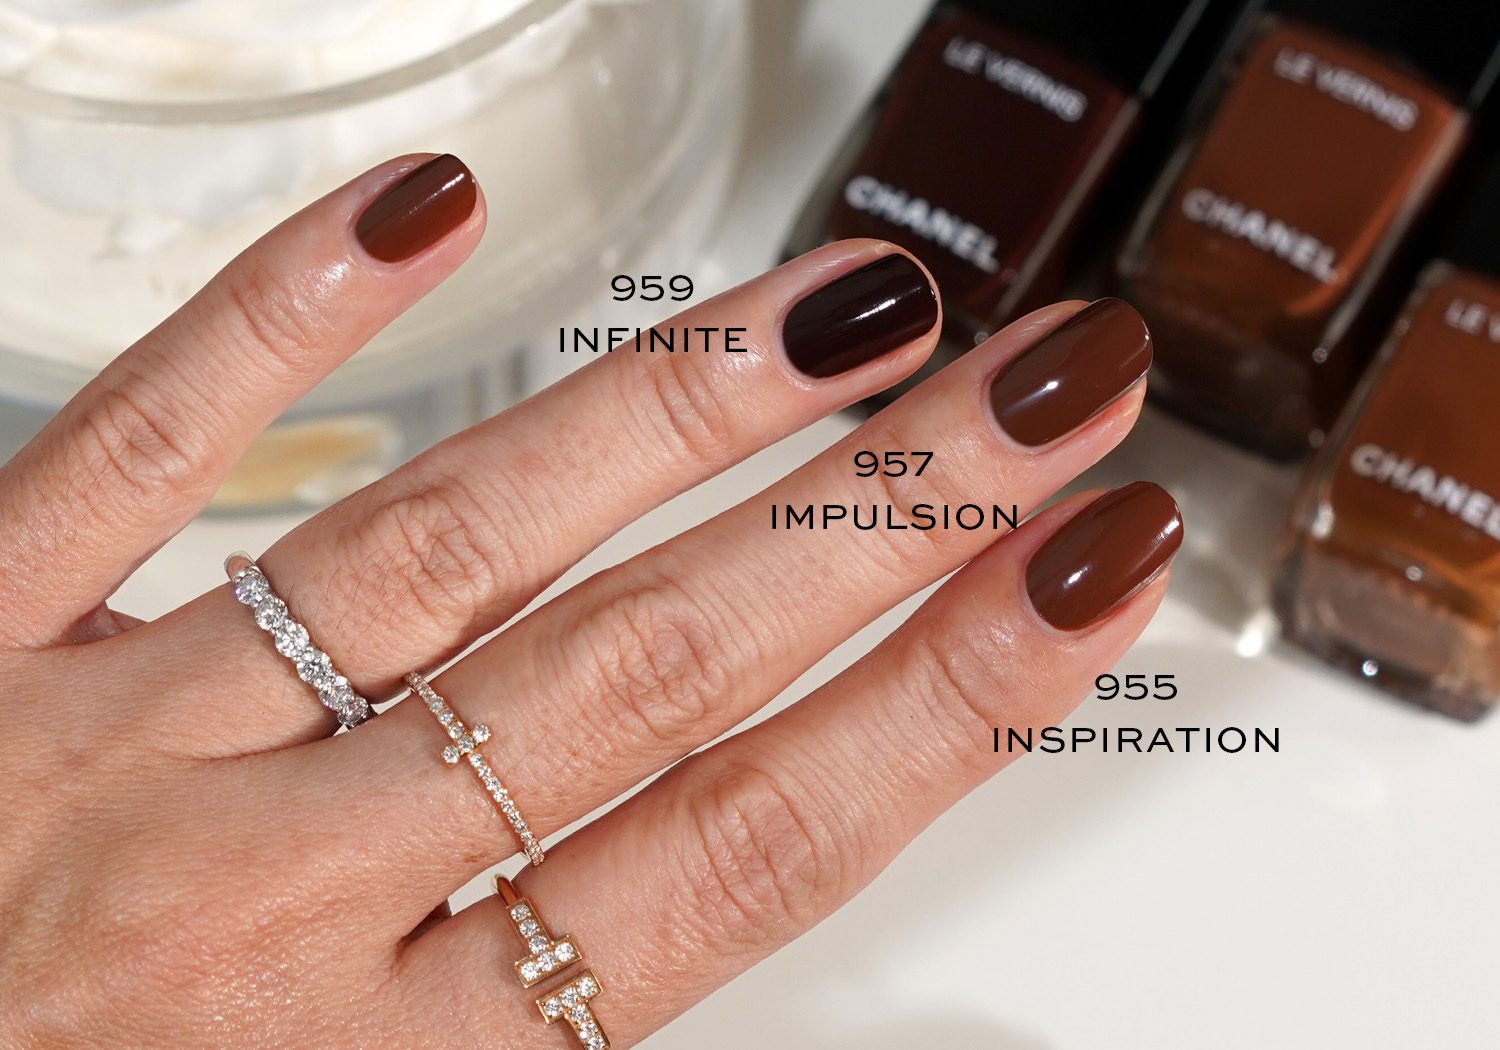 Chocolate Milk Nails Are the Newest Neutral Mani